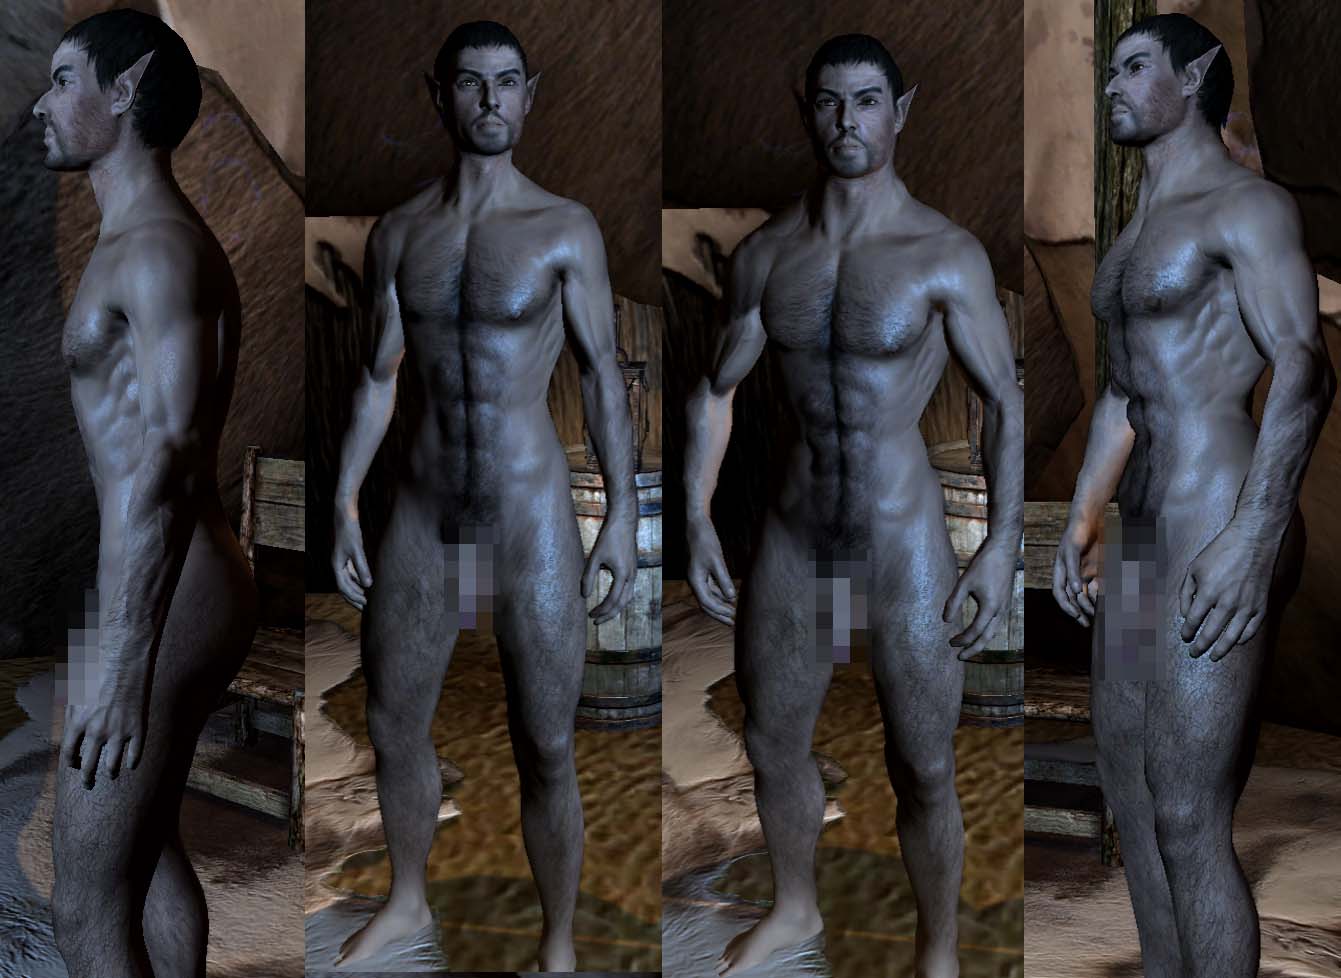 Male Body for BodySlide2 and Outfitstudio - Skyrim Adult Mods - LoversLab.